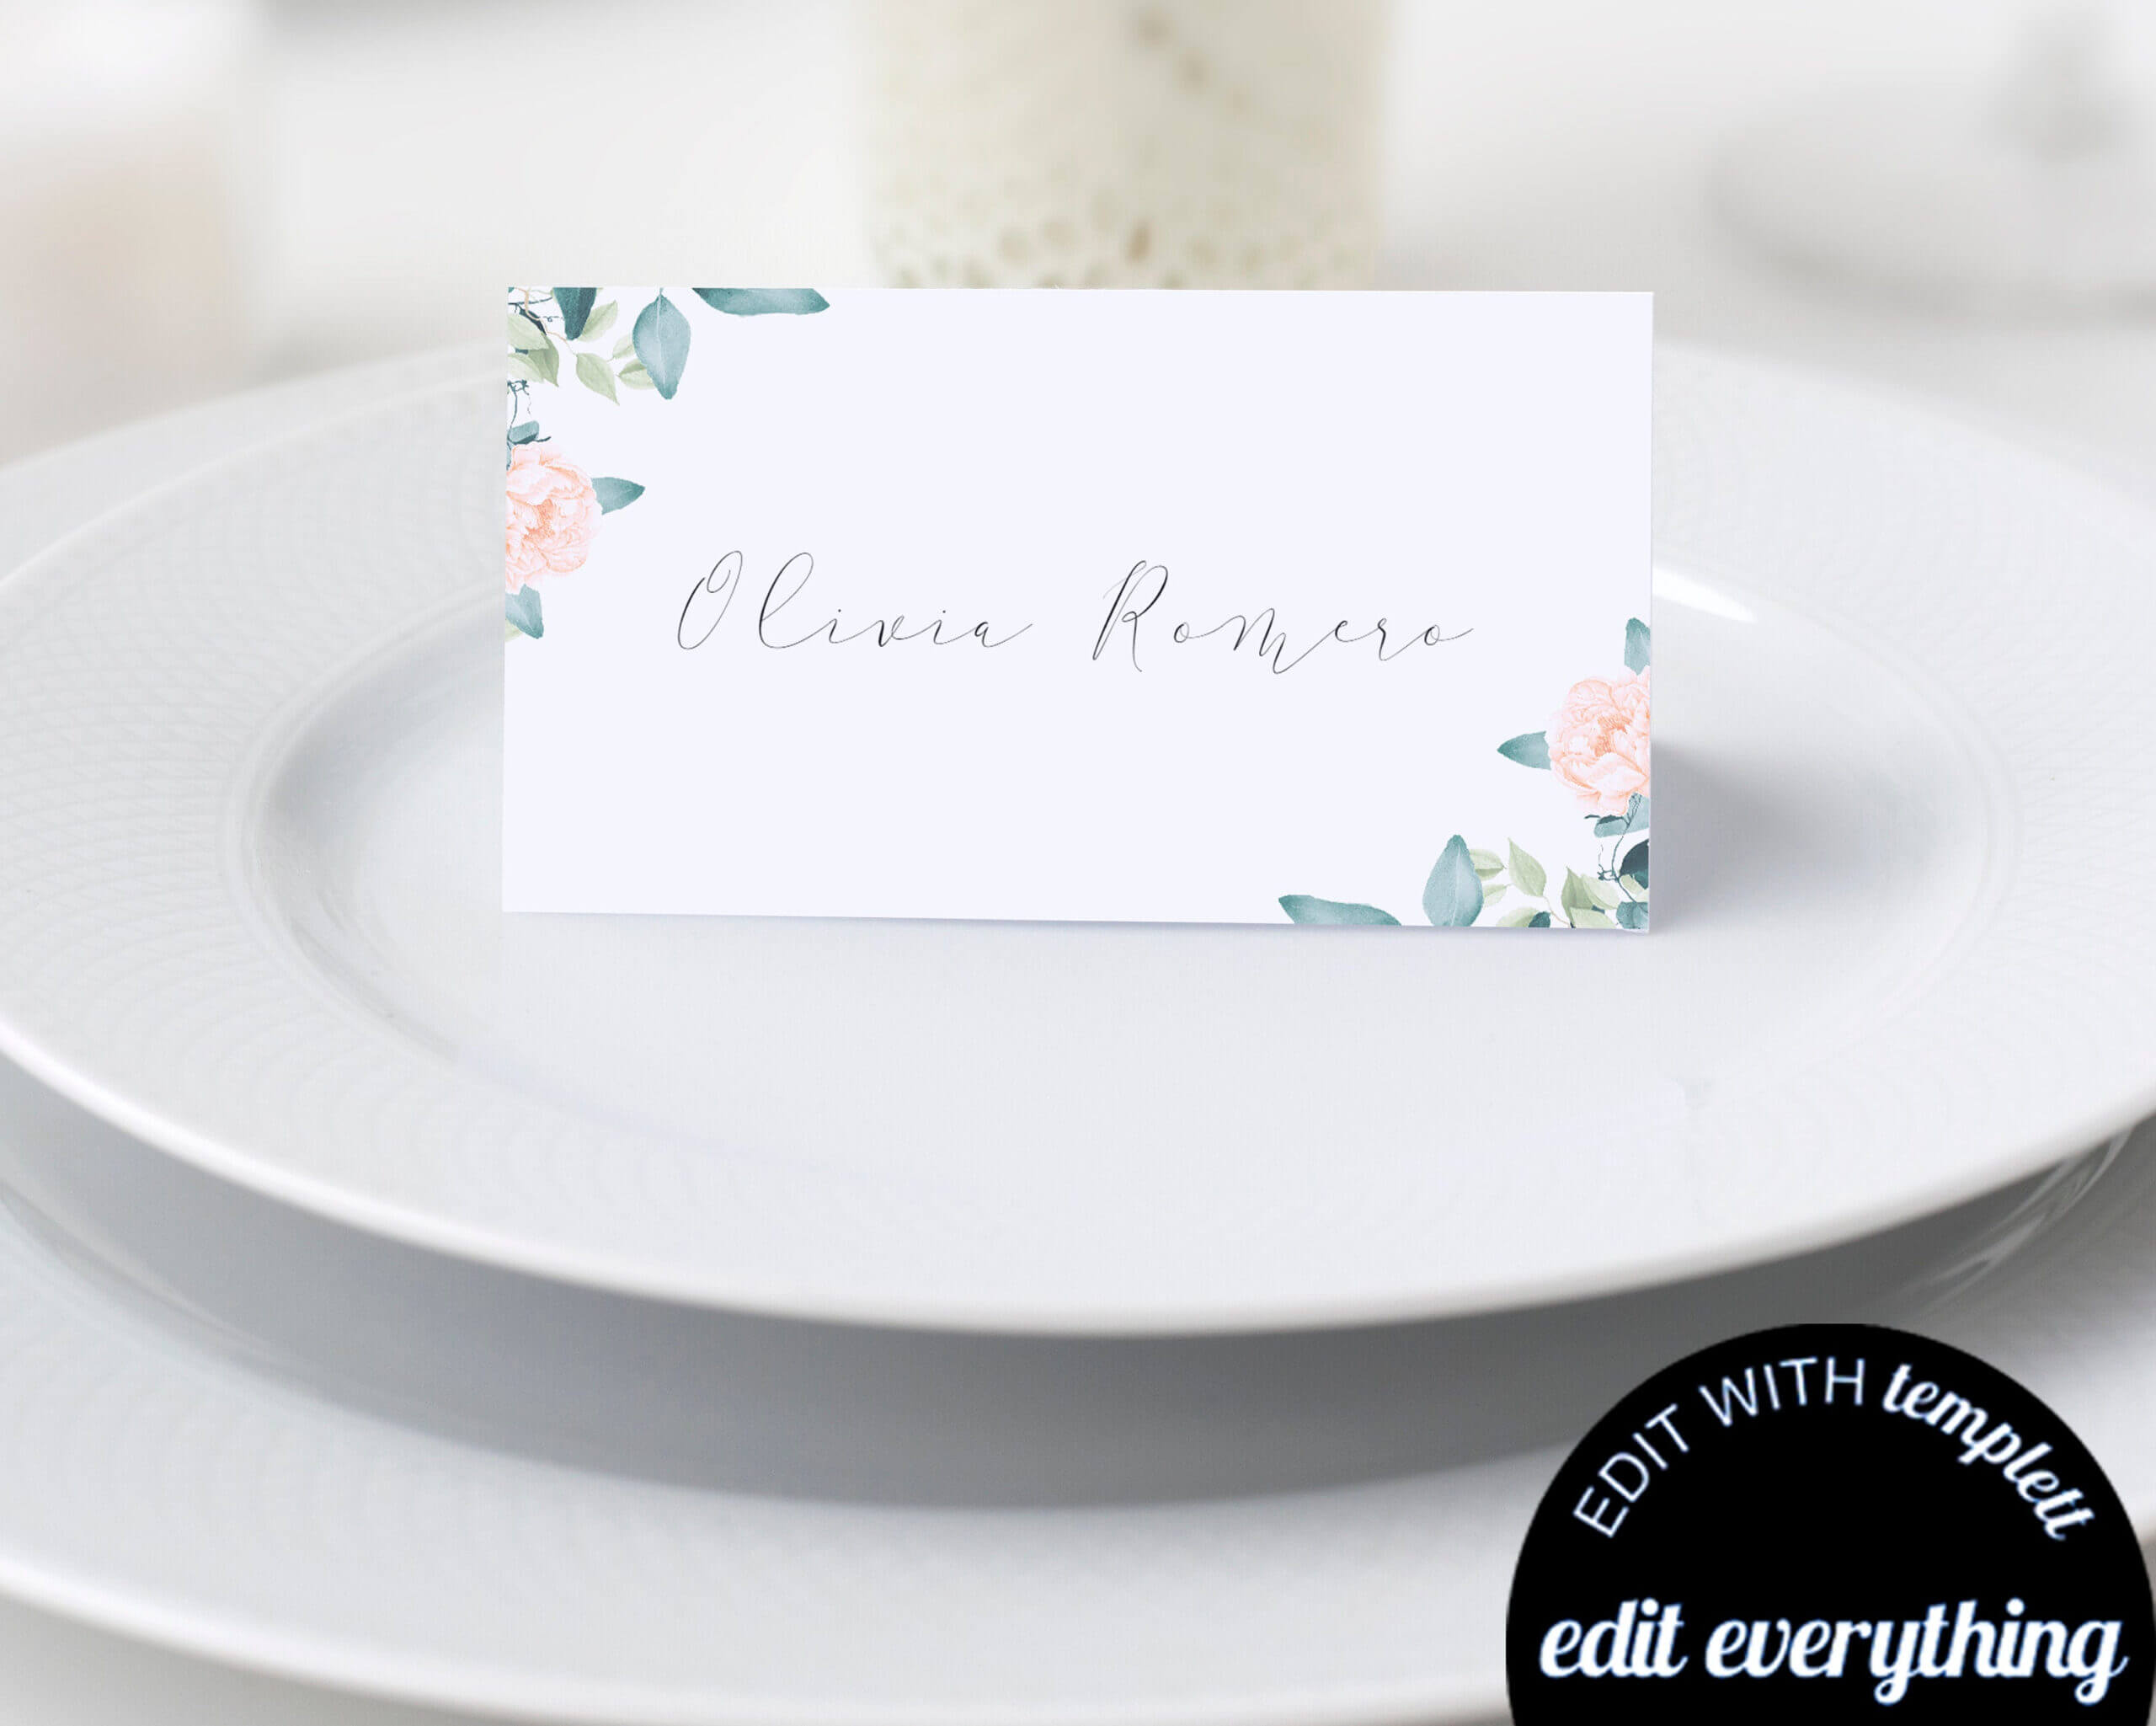 019 Template For Place Cards Il Fullxfull 1542140750 Dg3V Inside Free Template For Place Cards 6 Per Sheet